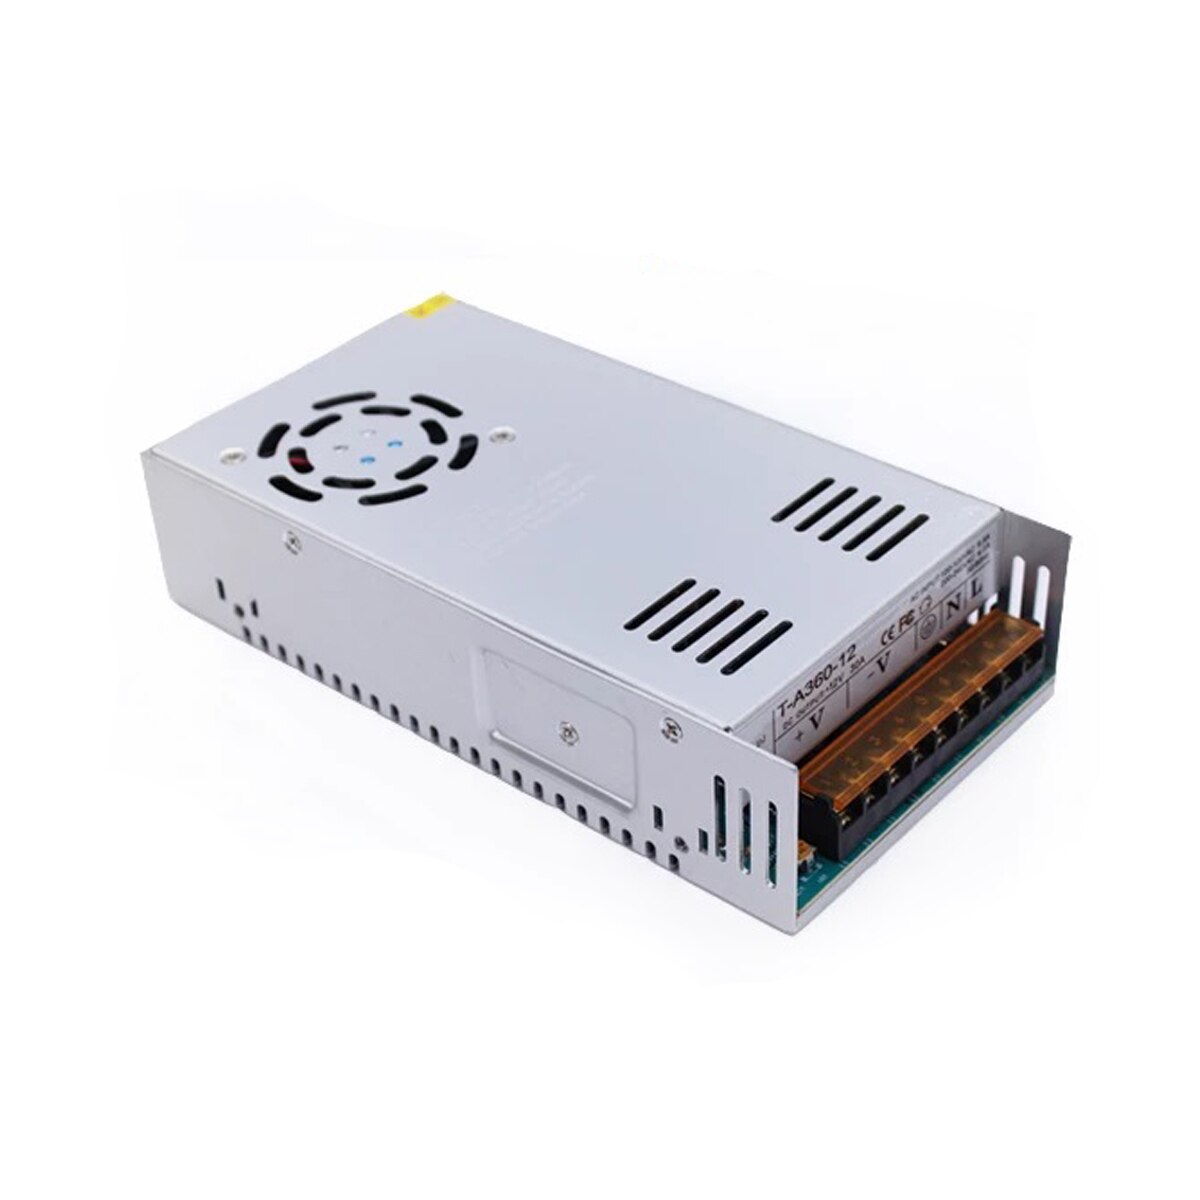 12V 30A 350W Switch Switching Power Supply Voor Cctv Camera Voor Security System Voor Led Light Strip 110-240V